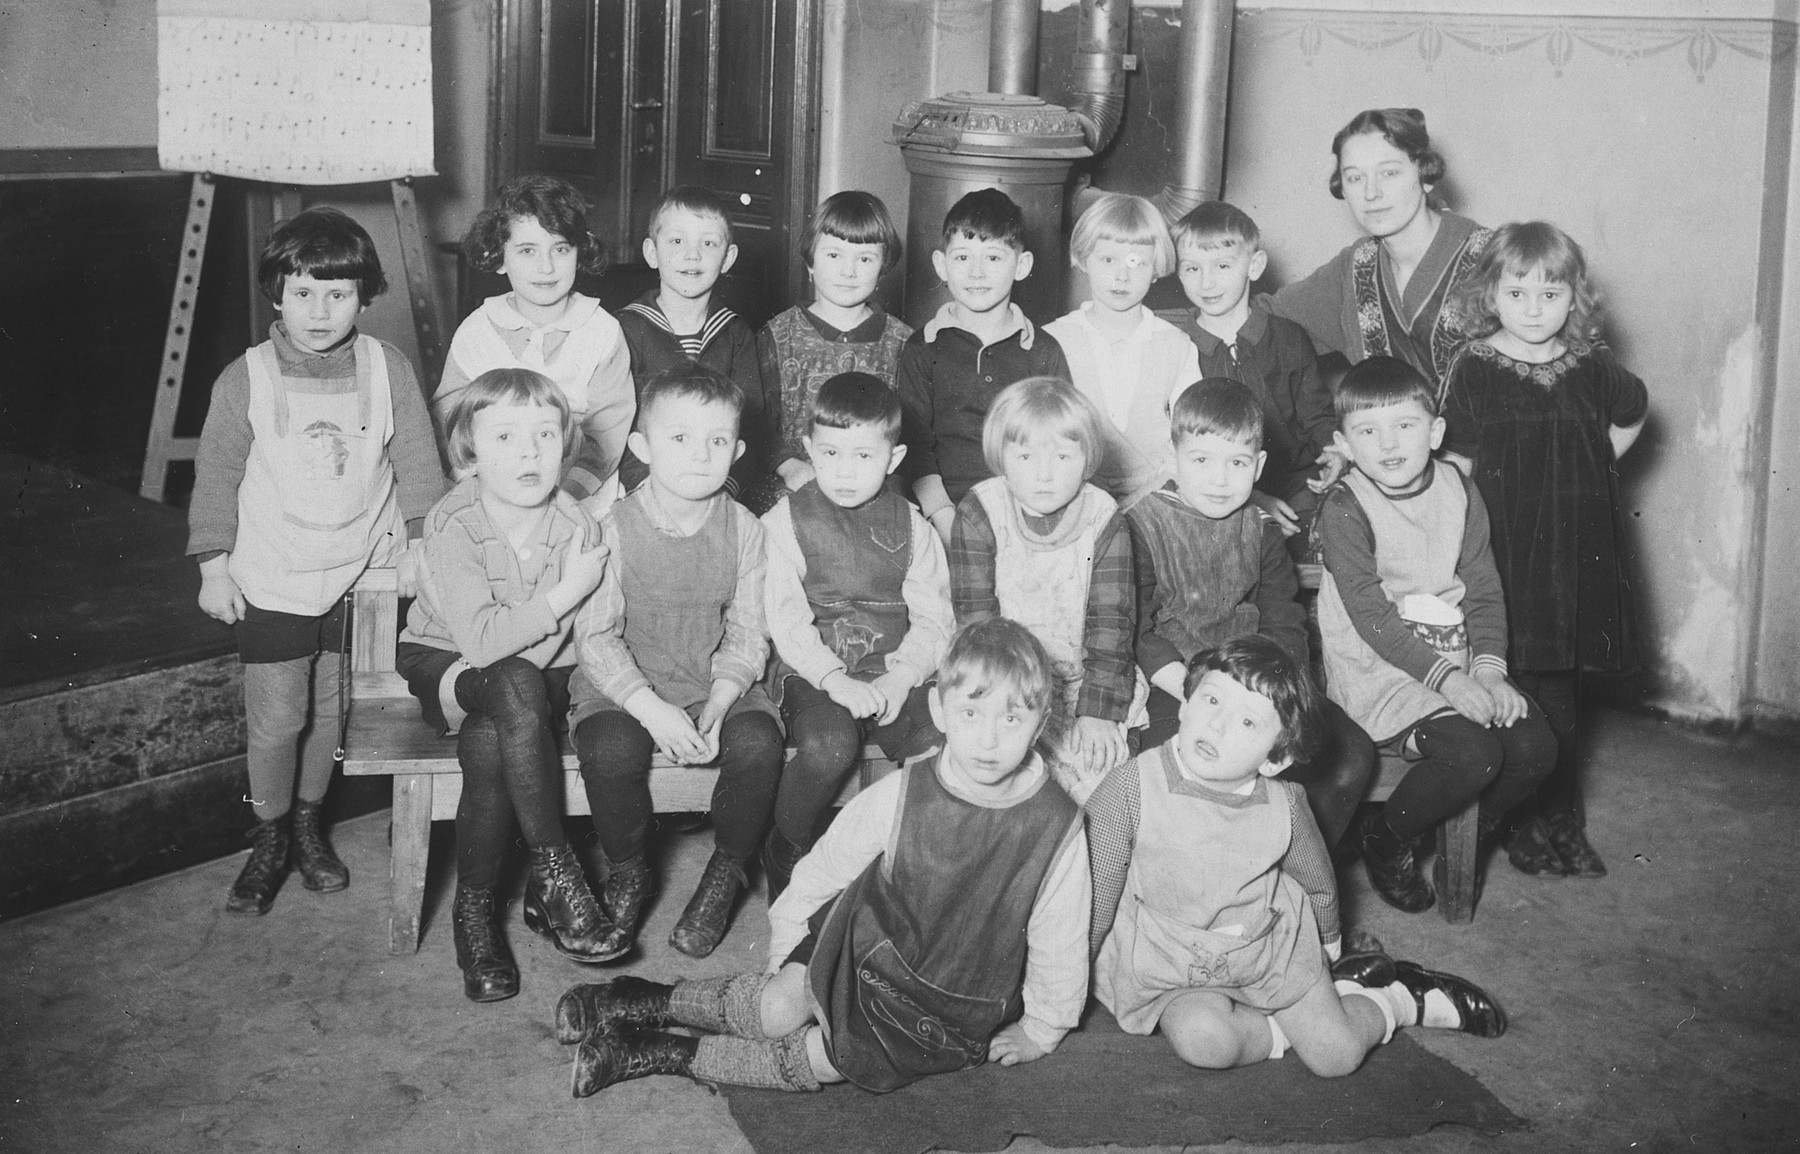 Group portrait of a first grade class in Berlin, Germany.

Among those pictured is Erich Zielenziger, standing in the back , fifth from the right.